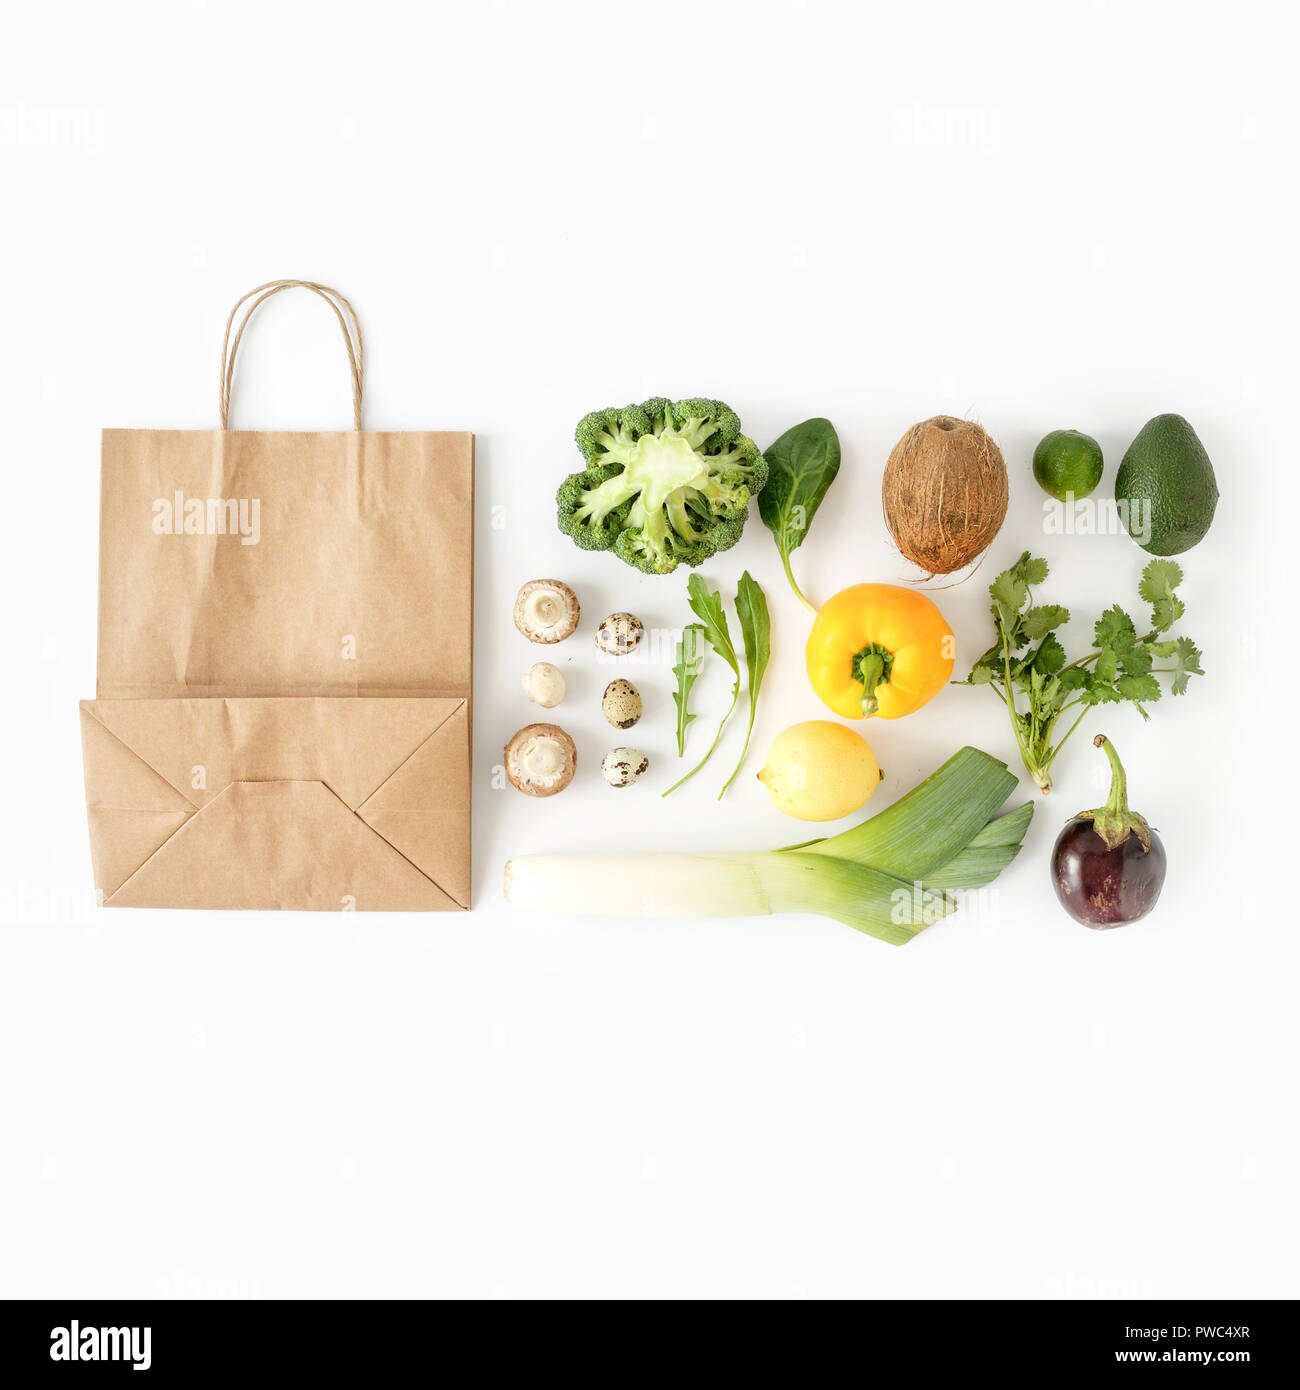 Healthy eating background, top view. Full paper bag of different health food on white background. Top view. Flat lay Stock Photo